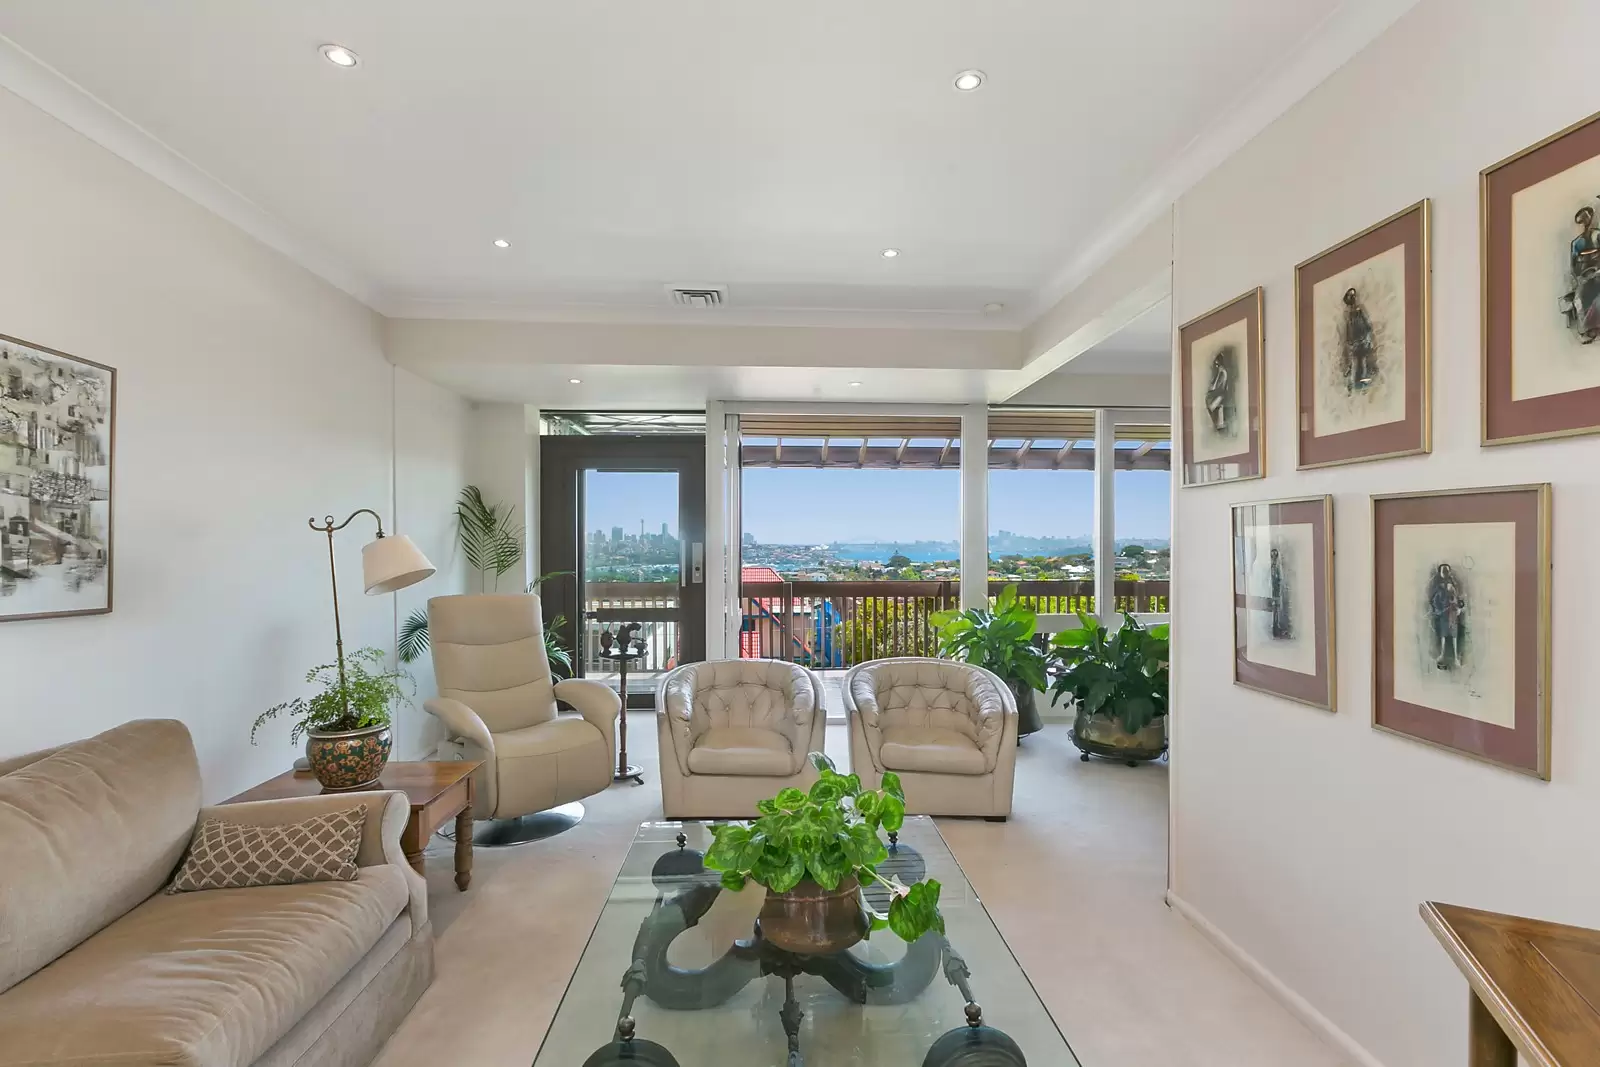 Photo #4: 4 Portland Street, Dover Heights - Sold by Sydney Sotheby's International Realty